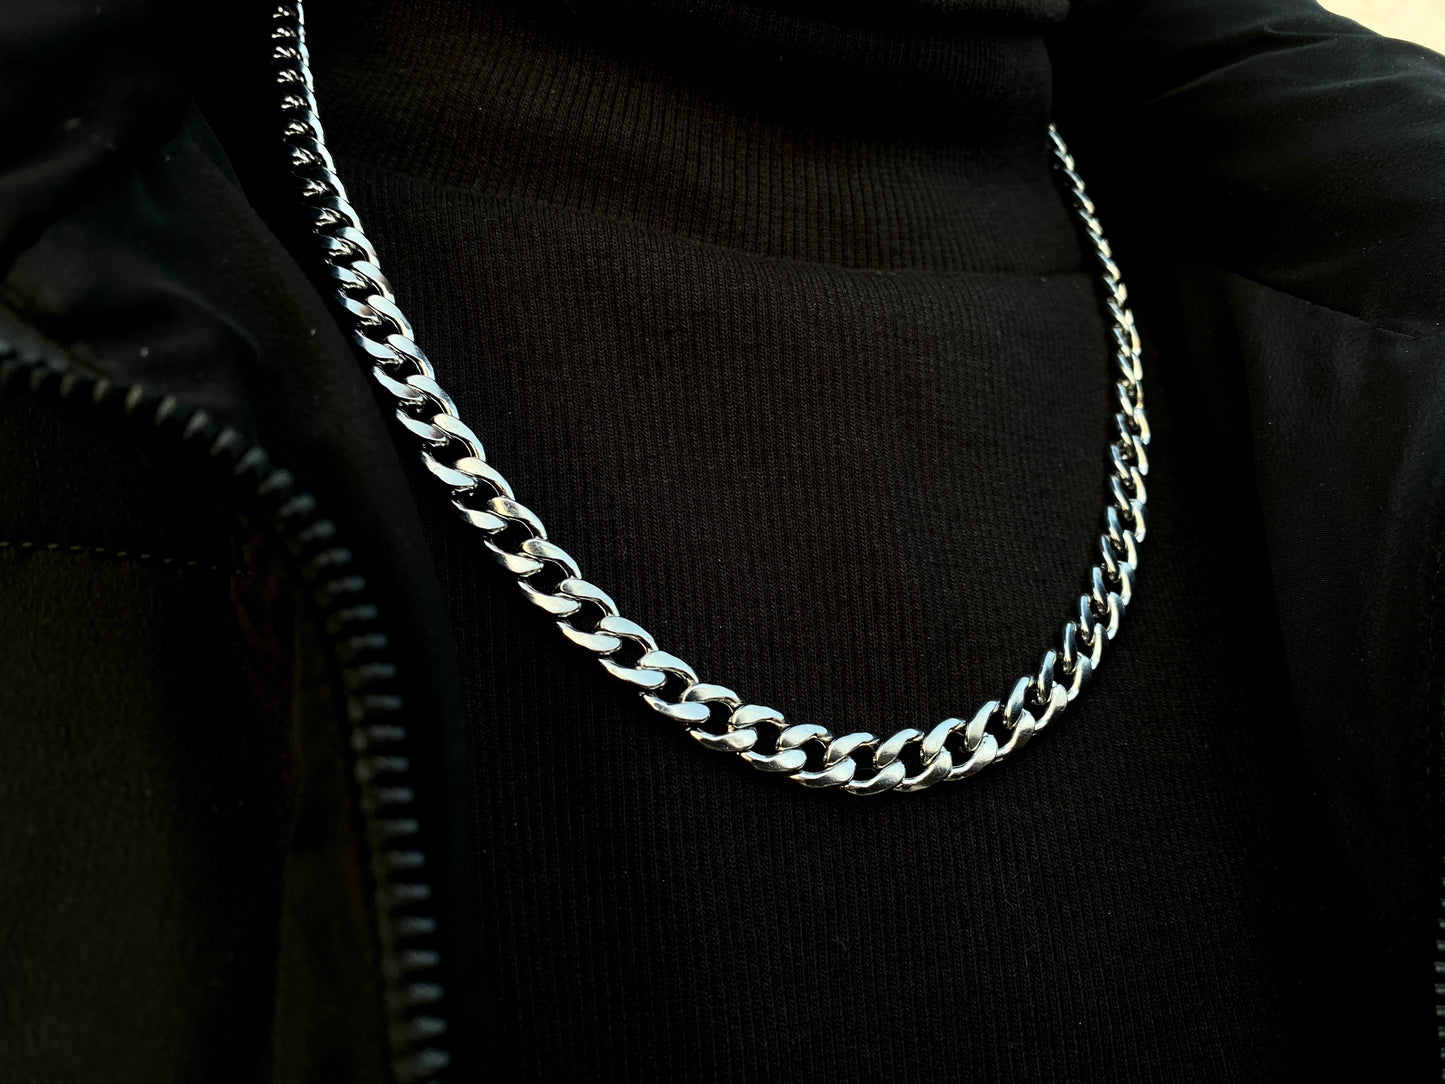 Cuban-Link Stainless Steel Chain.